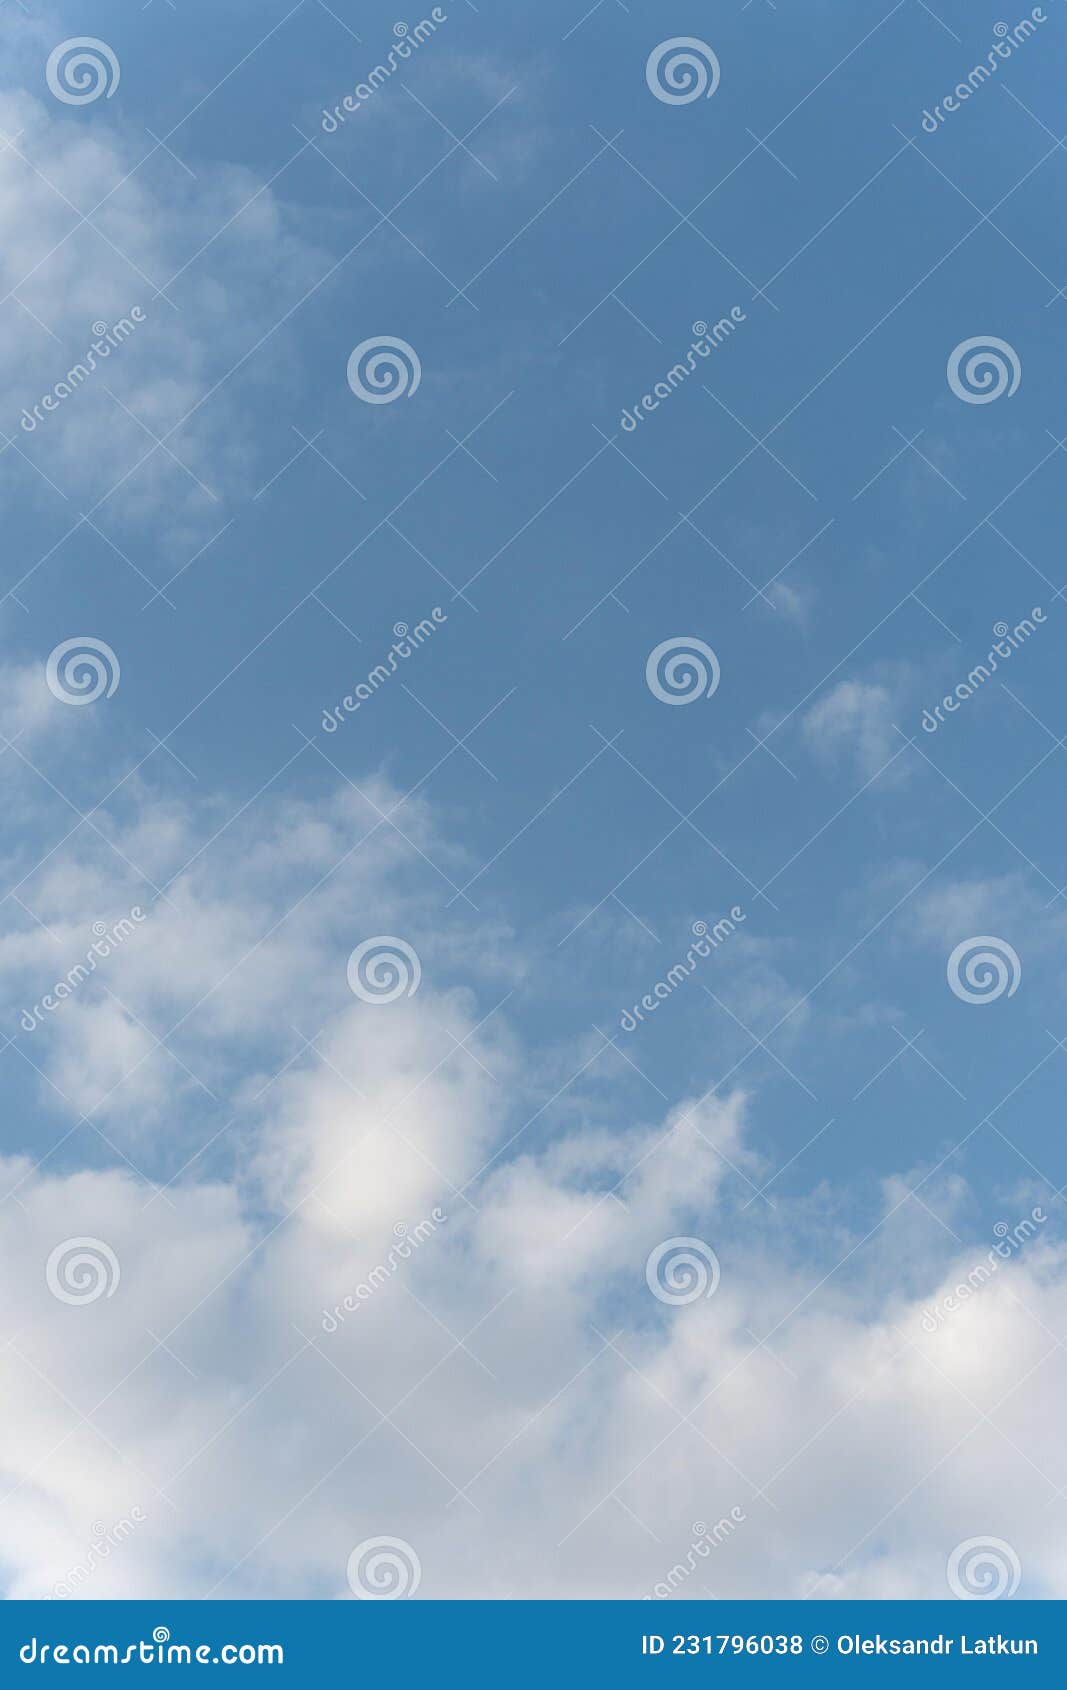 Clouds Sky Vertical Shot. High Quality Photo Stock Photo - Image of ...